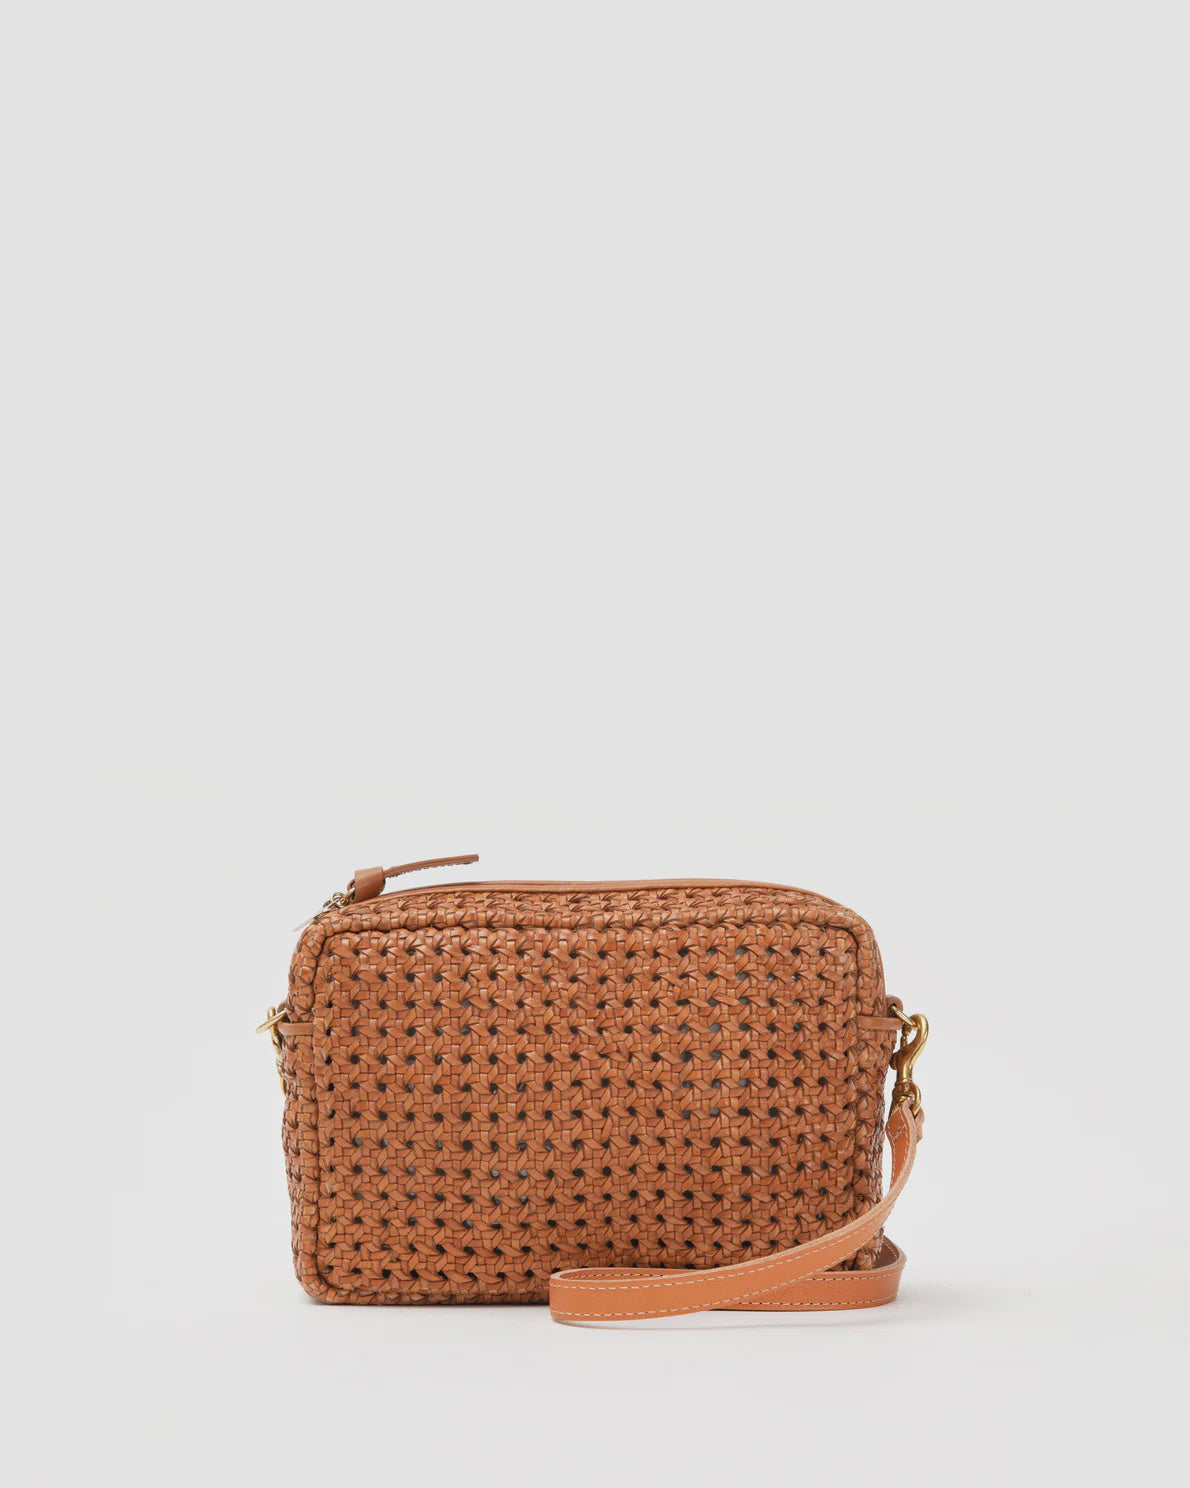 A small handwoven brown Clare Vivier Midi Sac with a zip top and a thin leather strap, displayed against an isolated white background.